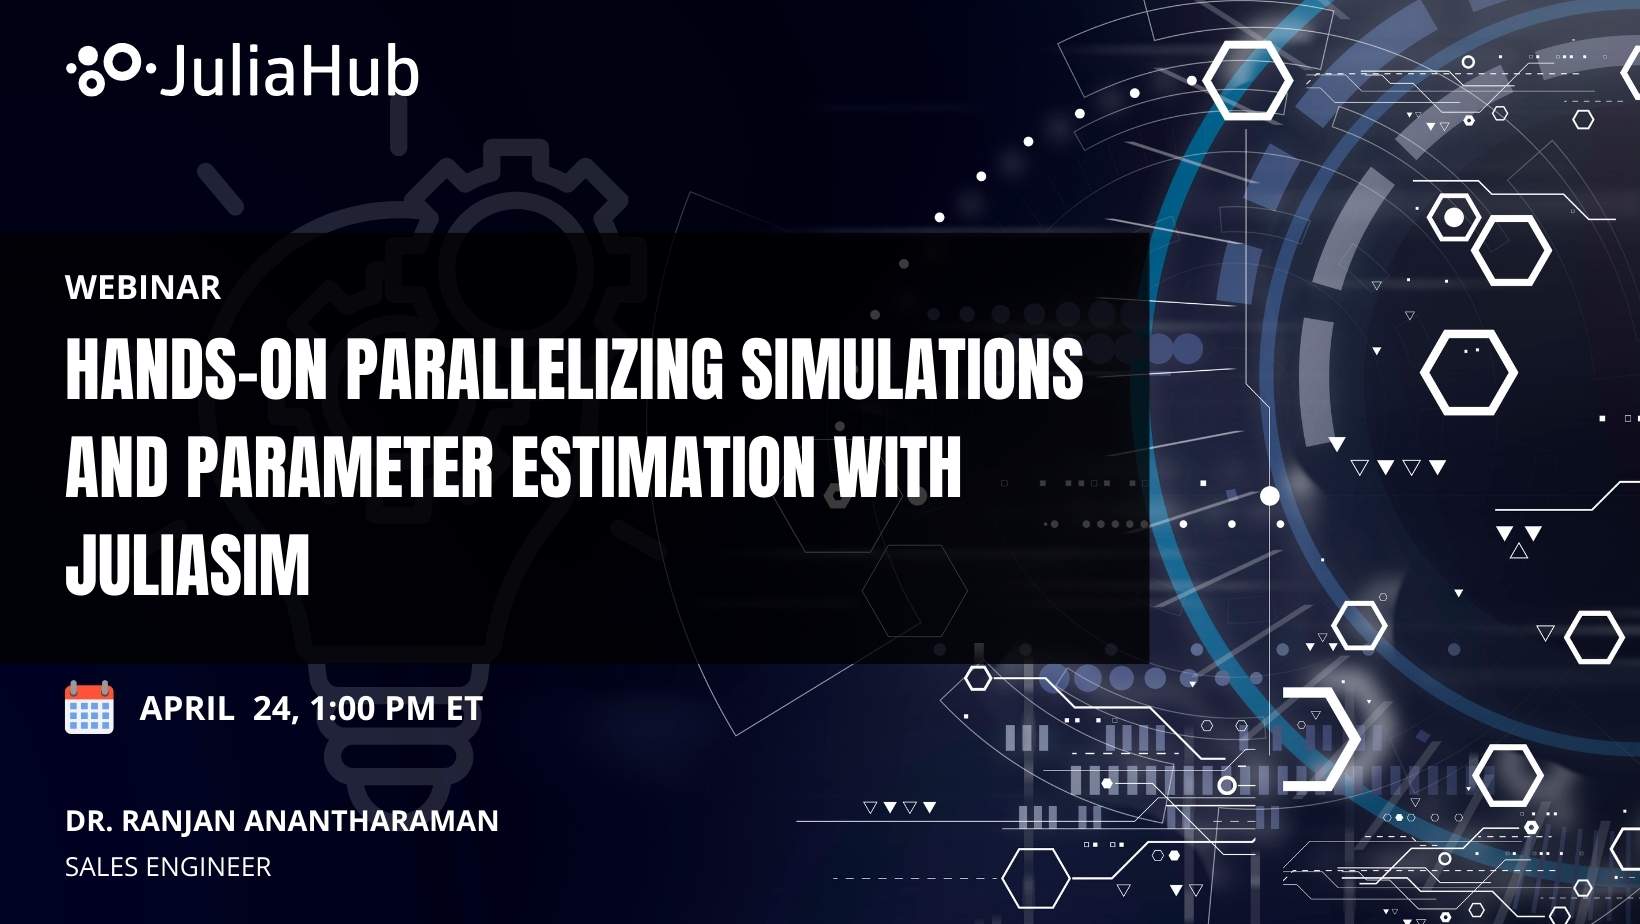 Hands-On Parallelizing Simulations and Parameter Estimation with JuliaSim | JuliaHub Upcoming Webinar